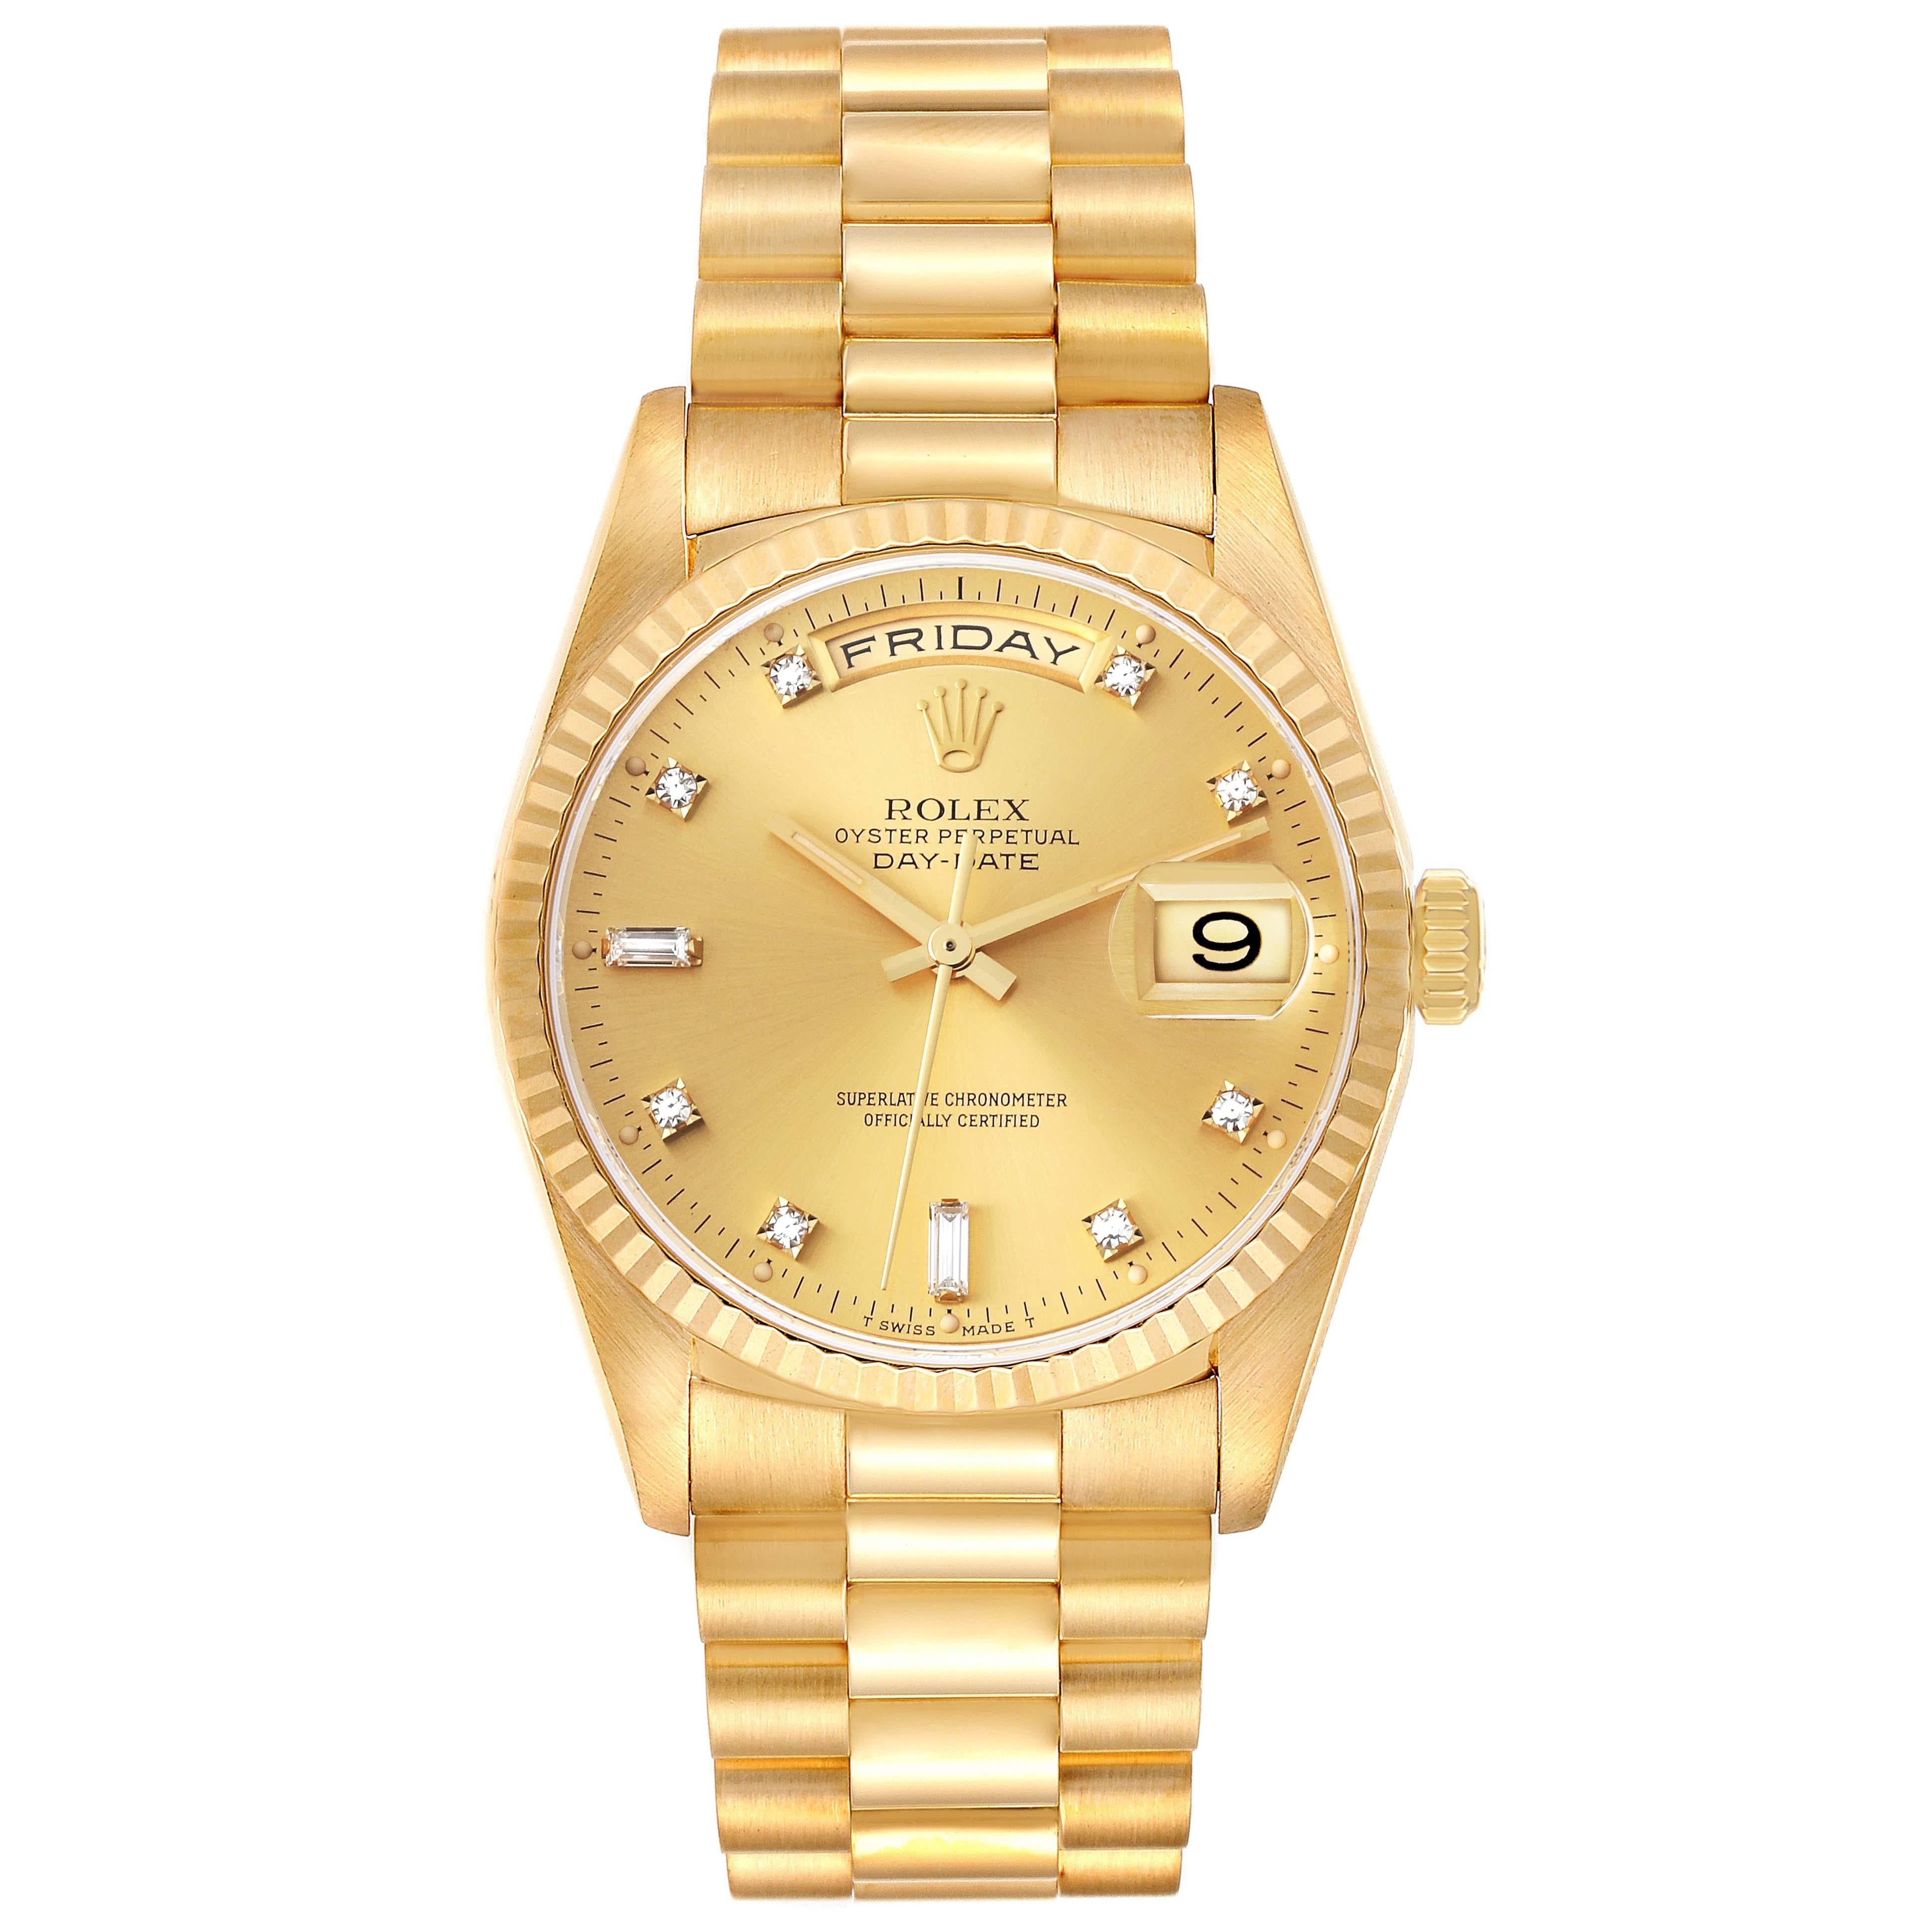 Rolex President Day-Date Yellow Gold Diamond Dial Mens Watch 18238. Officially certified chronometer automatic self-winding movement. 18k yellow gold oyster case 36.0 mm in diameter. Rolex logo on the crown. 18K yellow gold fluted bezel. Scratch